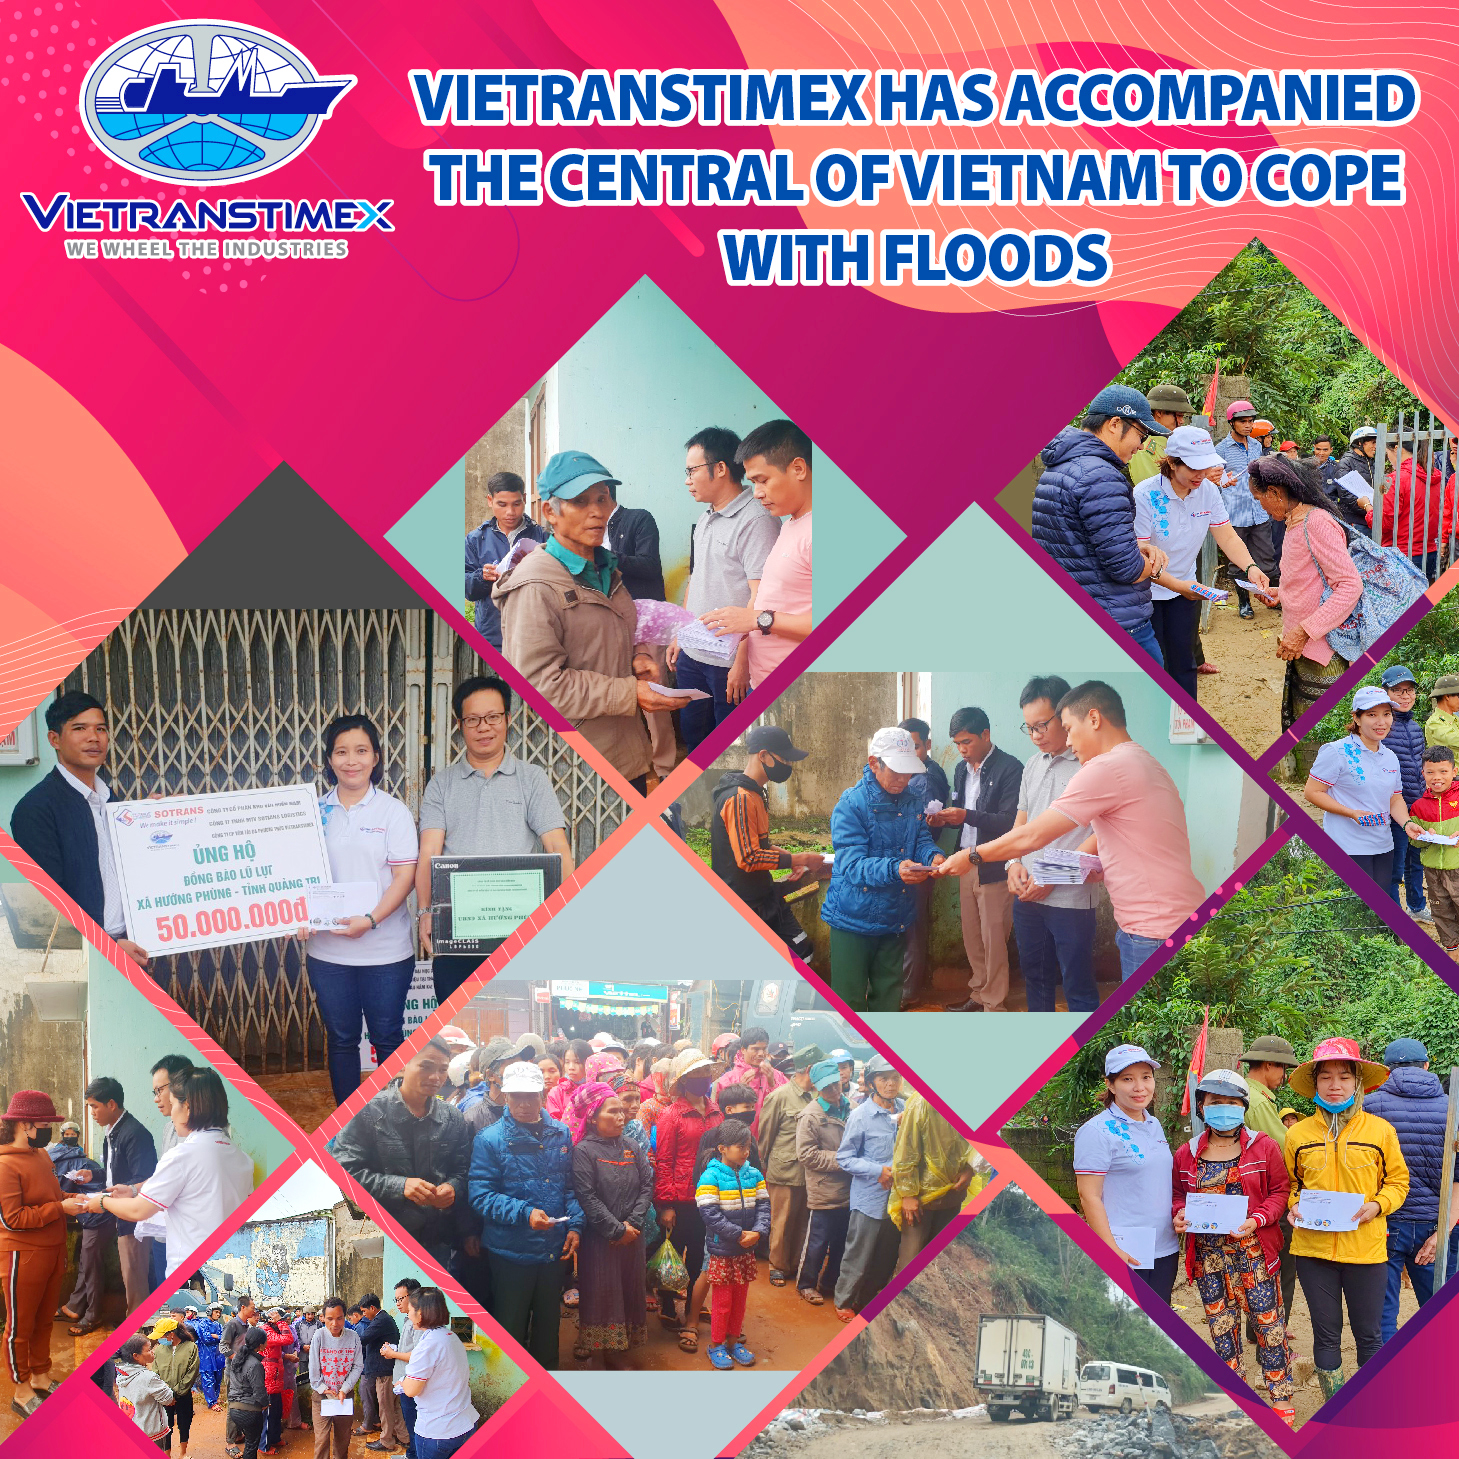 Vietranstimex Has Accompanied The Central Of Vietnam To Cope With Floods